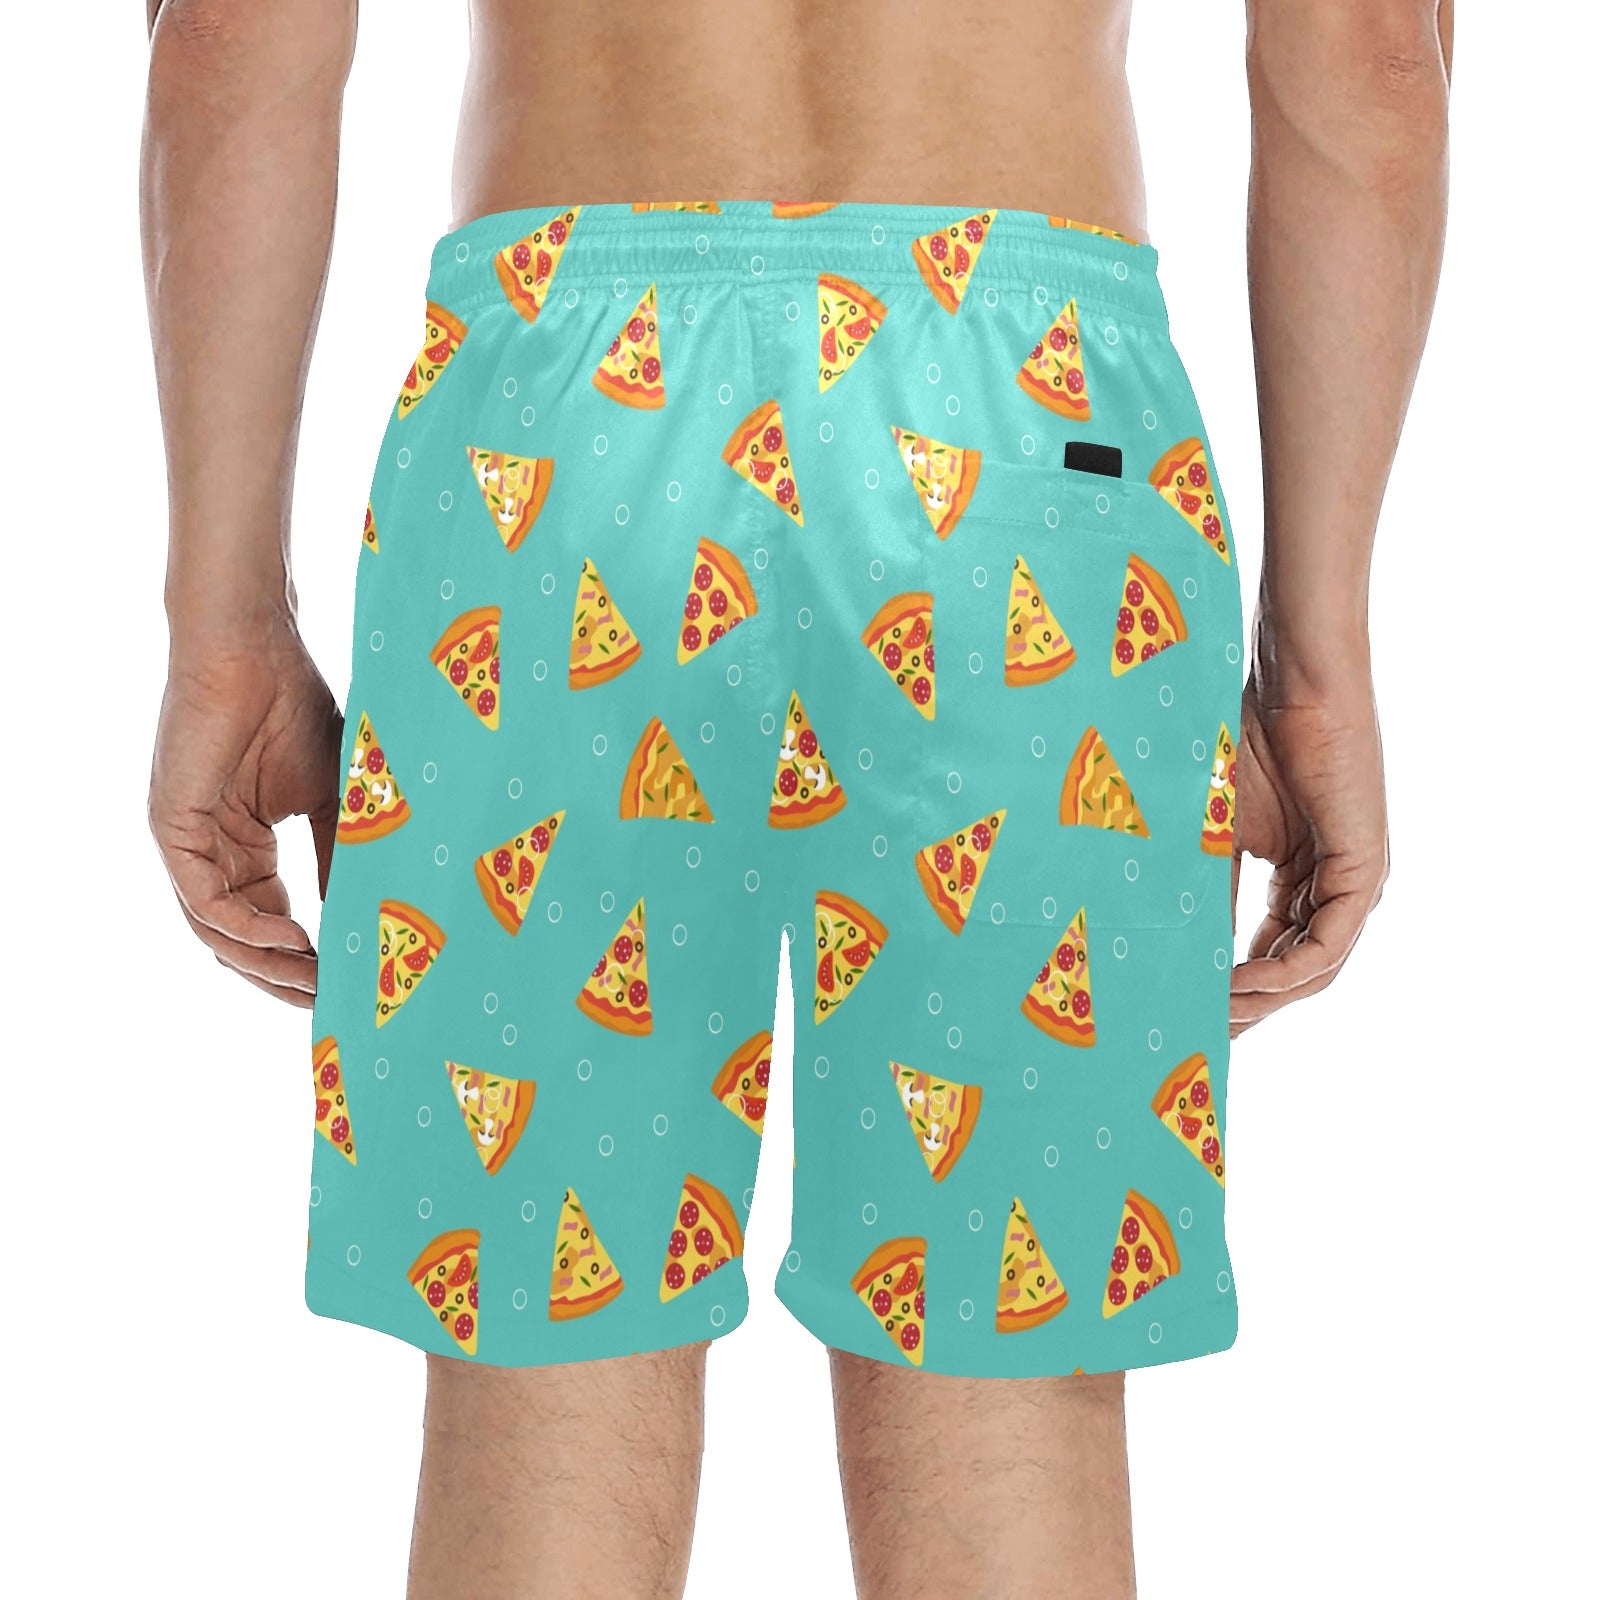 Pizza Men Mid Length Shorts, Funny Food Beach Swim Trunks Front and Back Pockets Mesh Drawstring Boys Casual Bathing Suit Summer Starcove Fashion